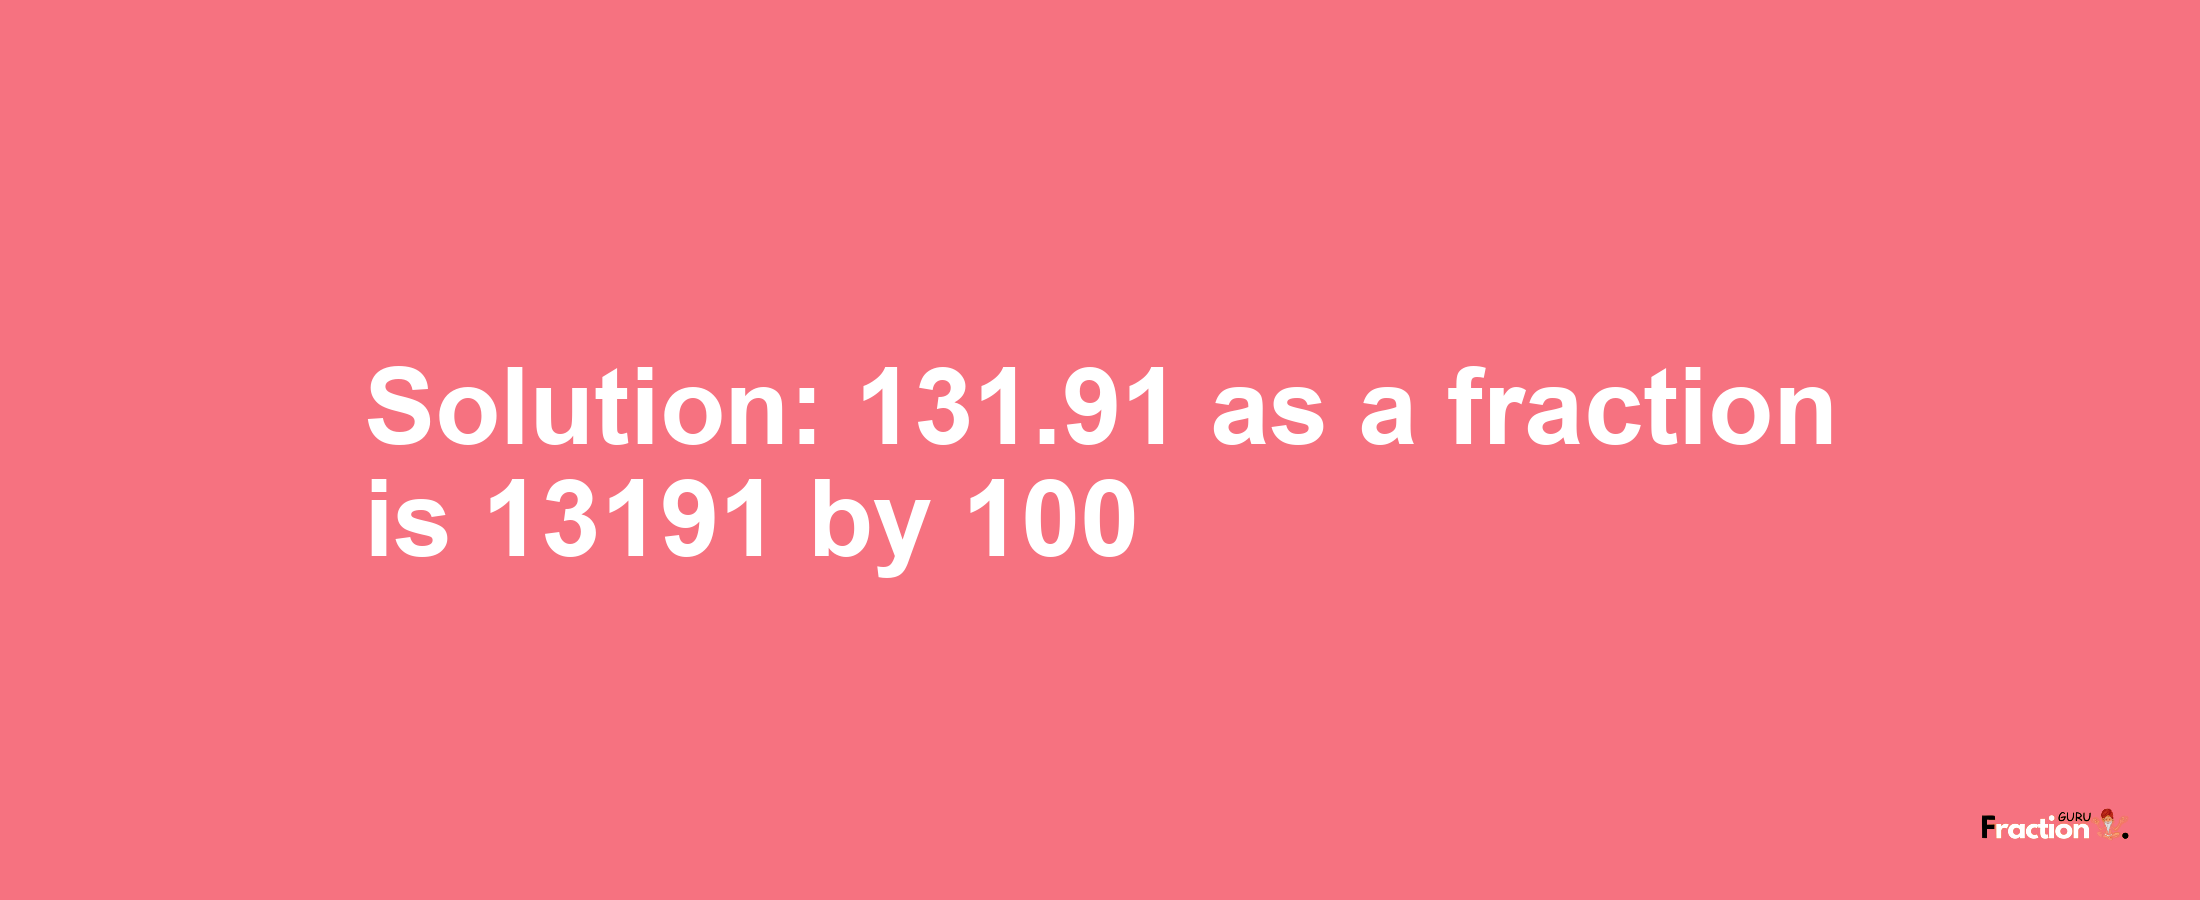 Solution:131.91 as a fraction is 13191/100